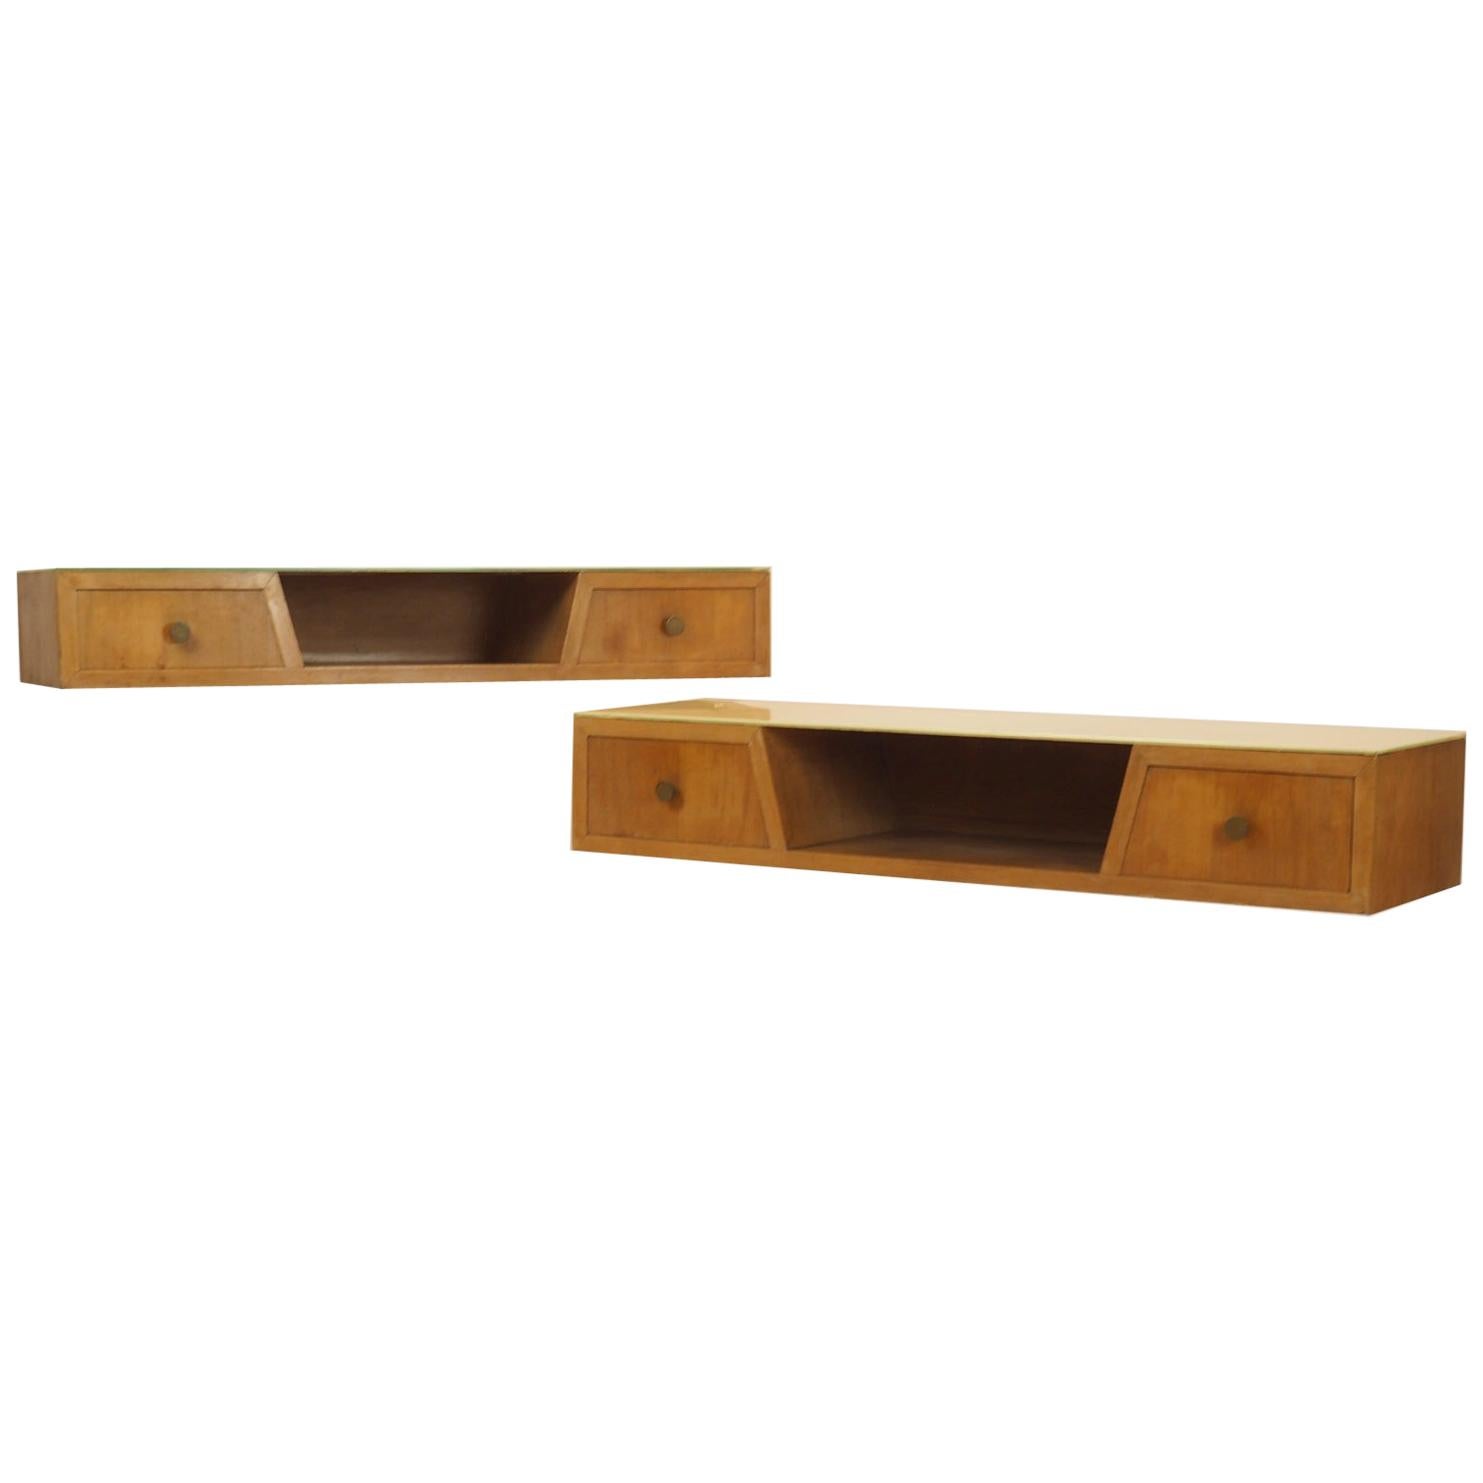 Gio Ponti Couple of Hanging Consoles Certified, a One-Off, Milano, 1950s For Sale